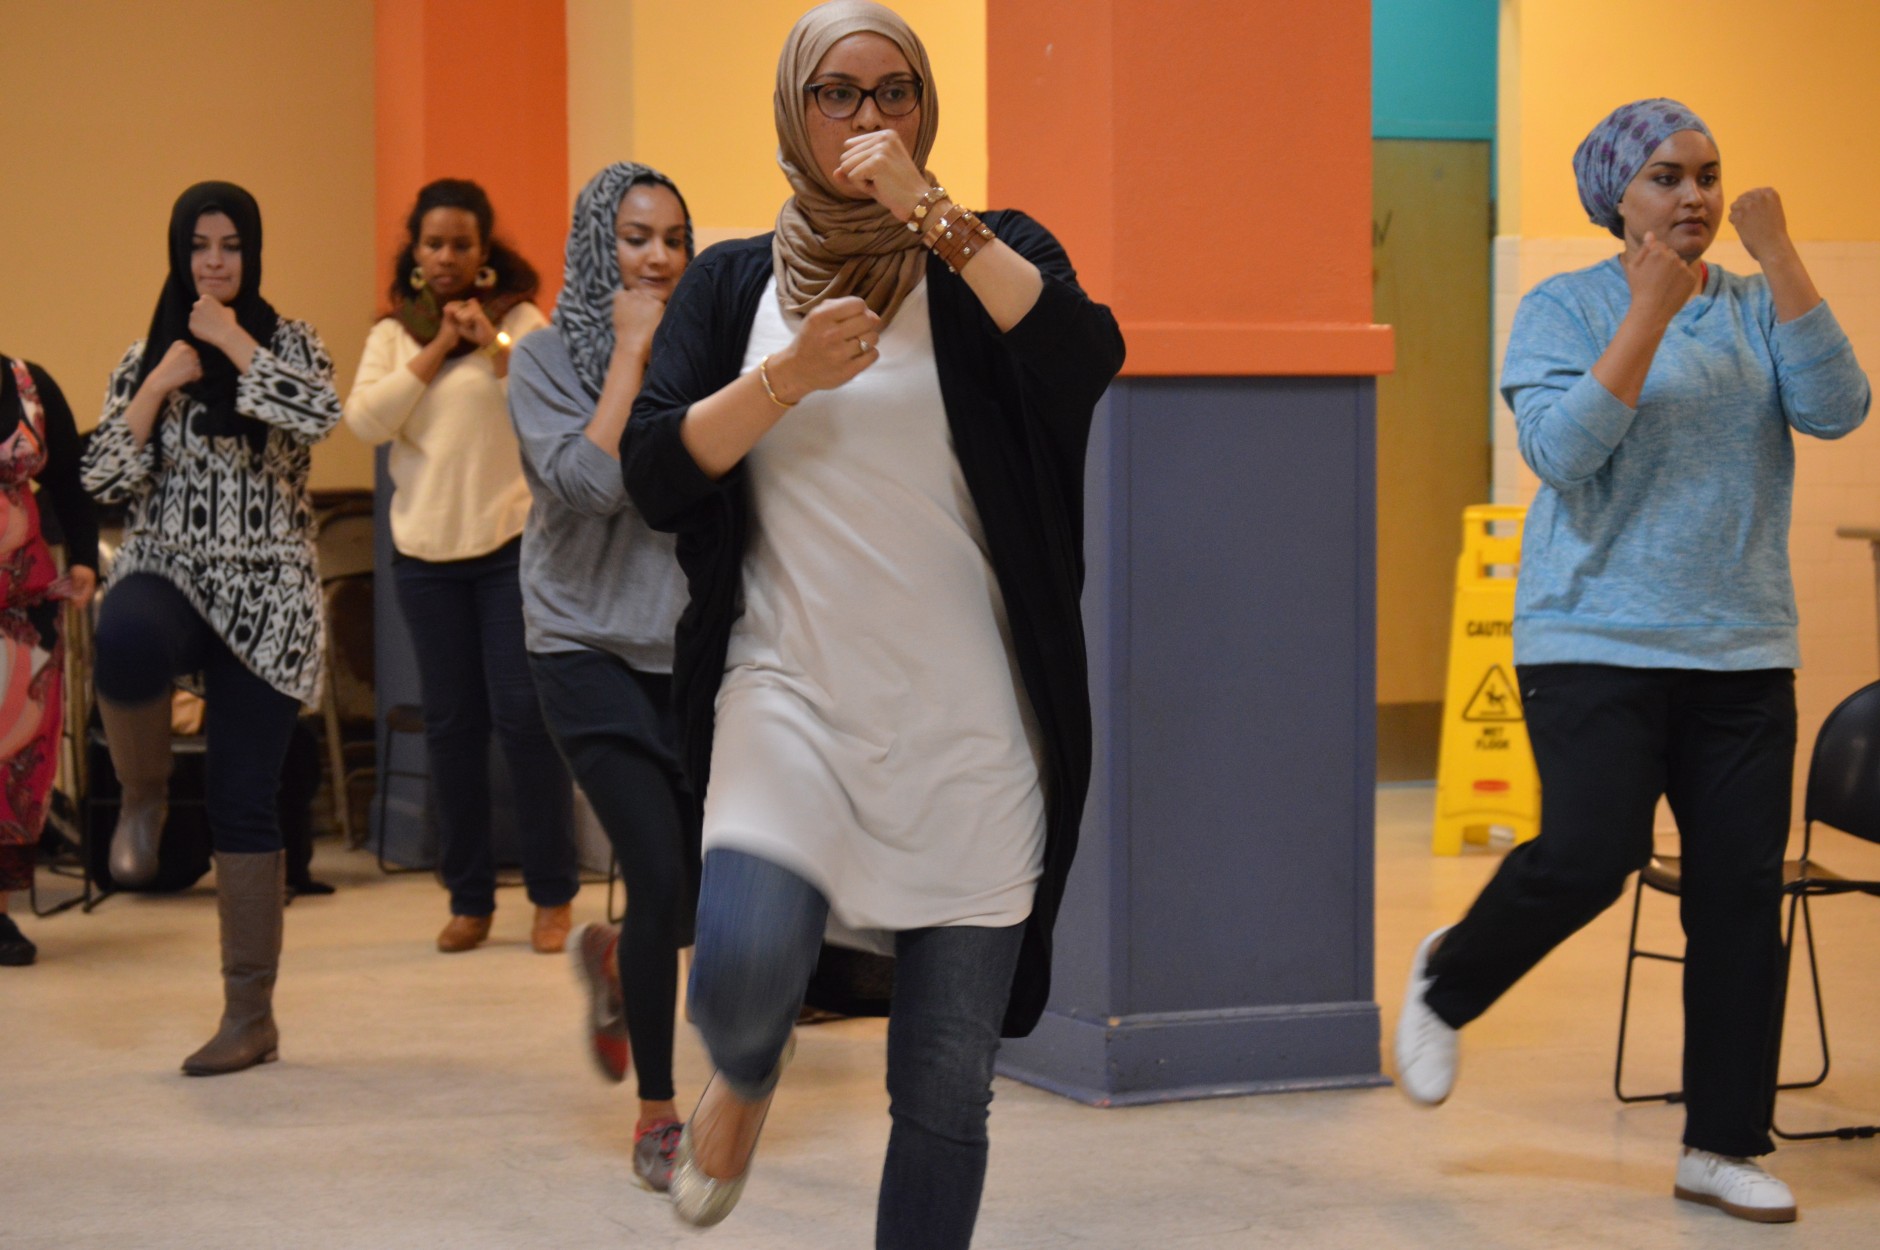 Siddiqui practices her front kick with fists out. (WTOP/Omama Altaleb)